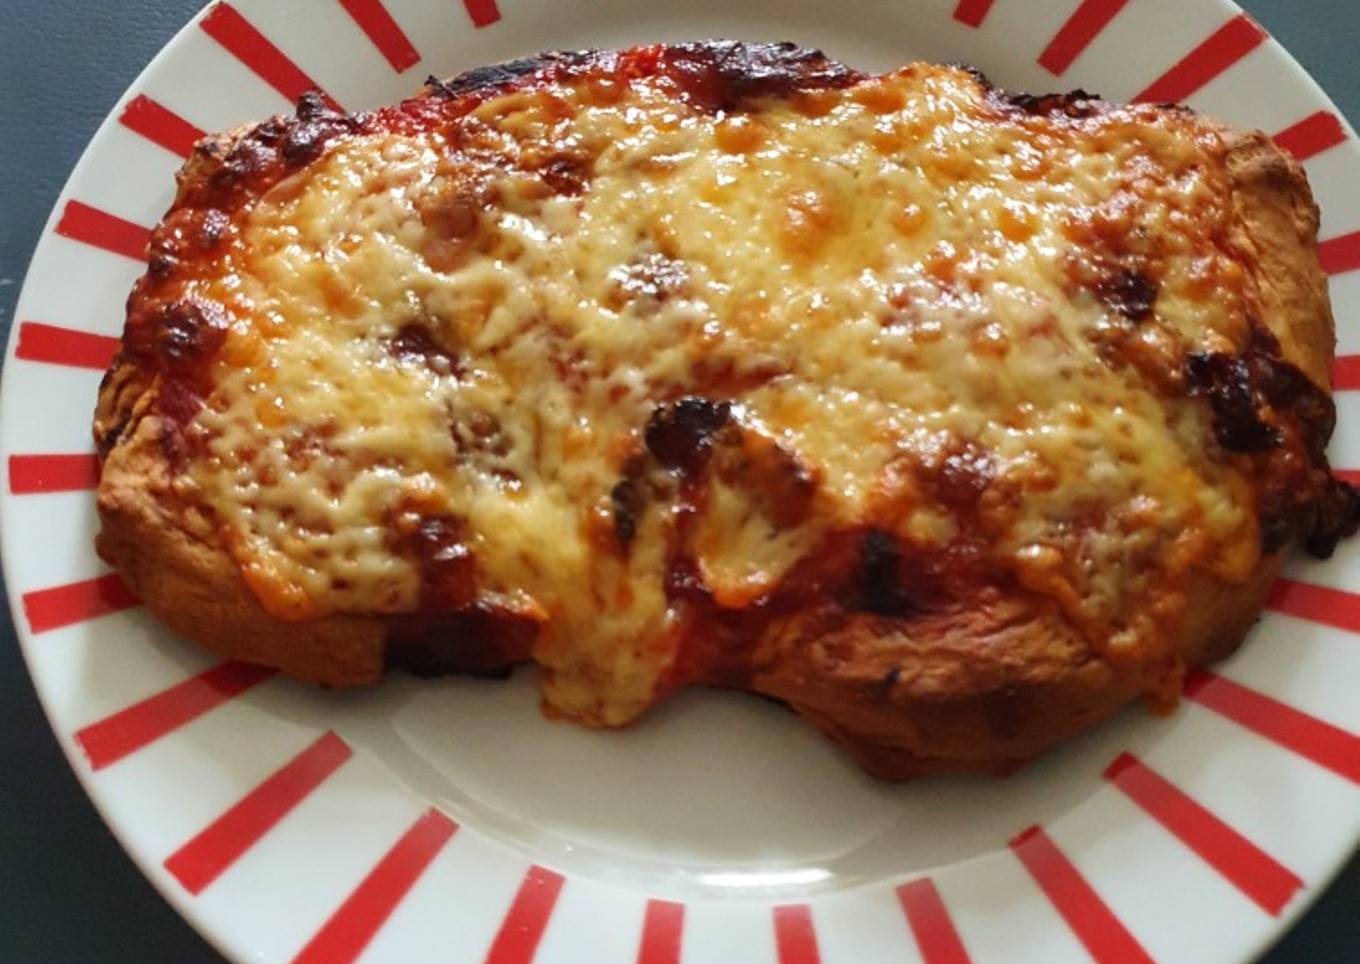 Twice baked Pizza